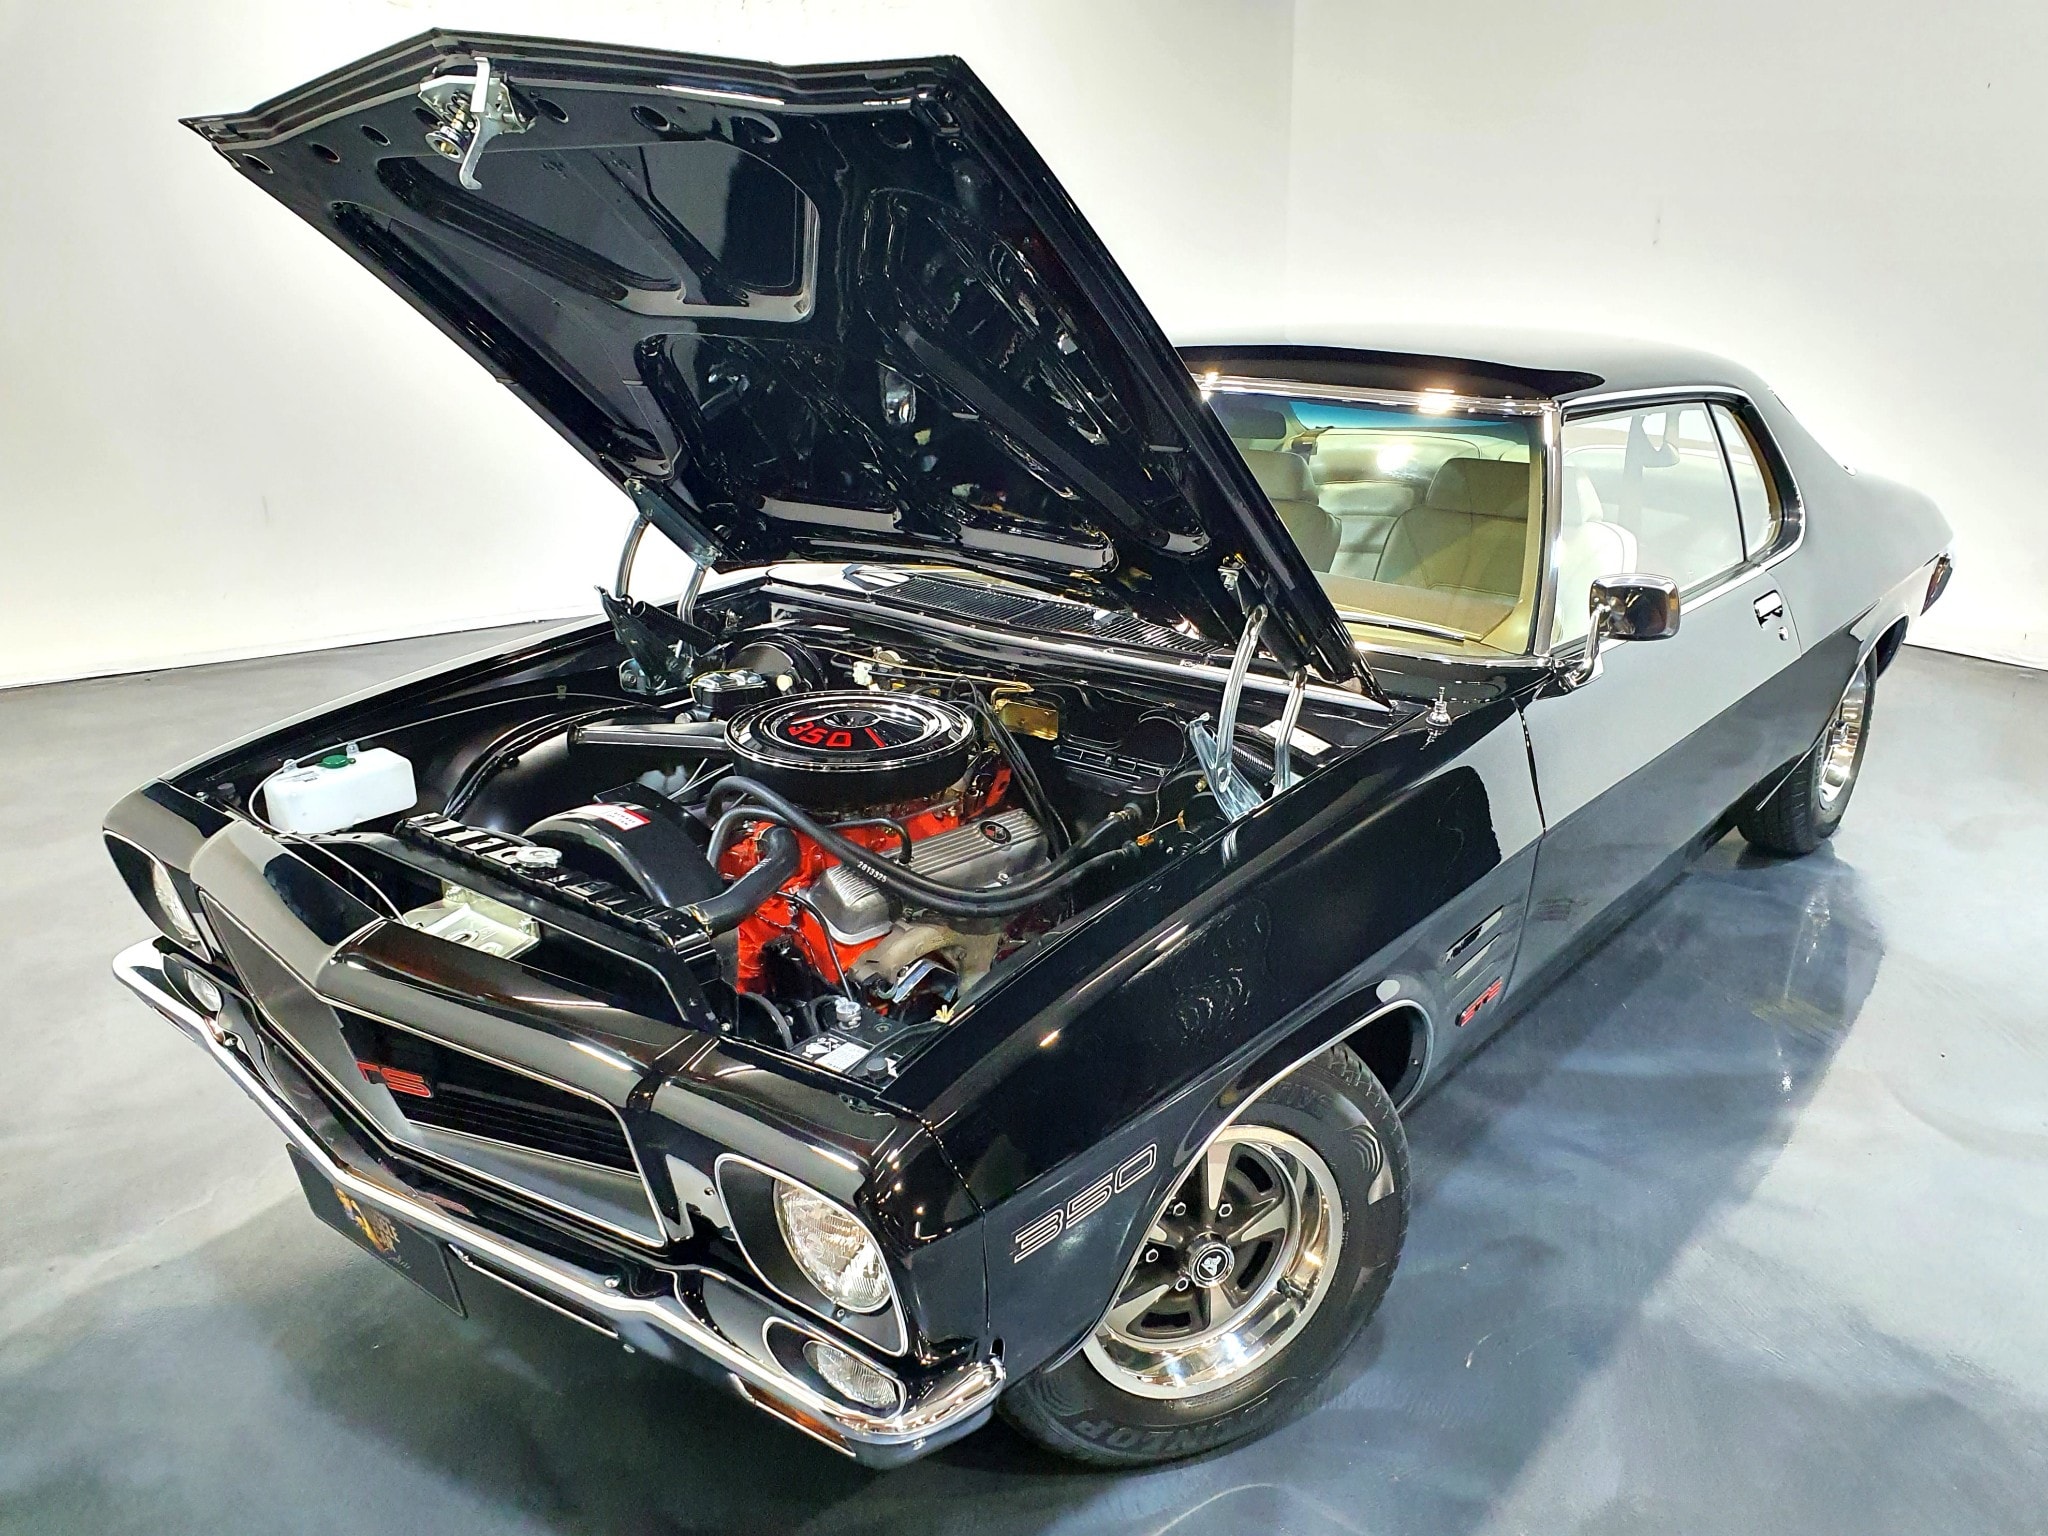 One Off Special Order 1973 Holden Hq Monaro Gts 350 4 Speed Will Cost You Over Au 350 000 Carscoops